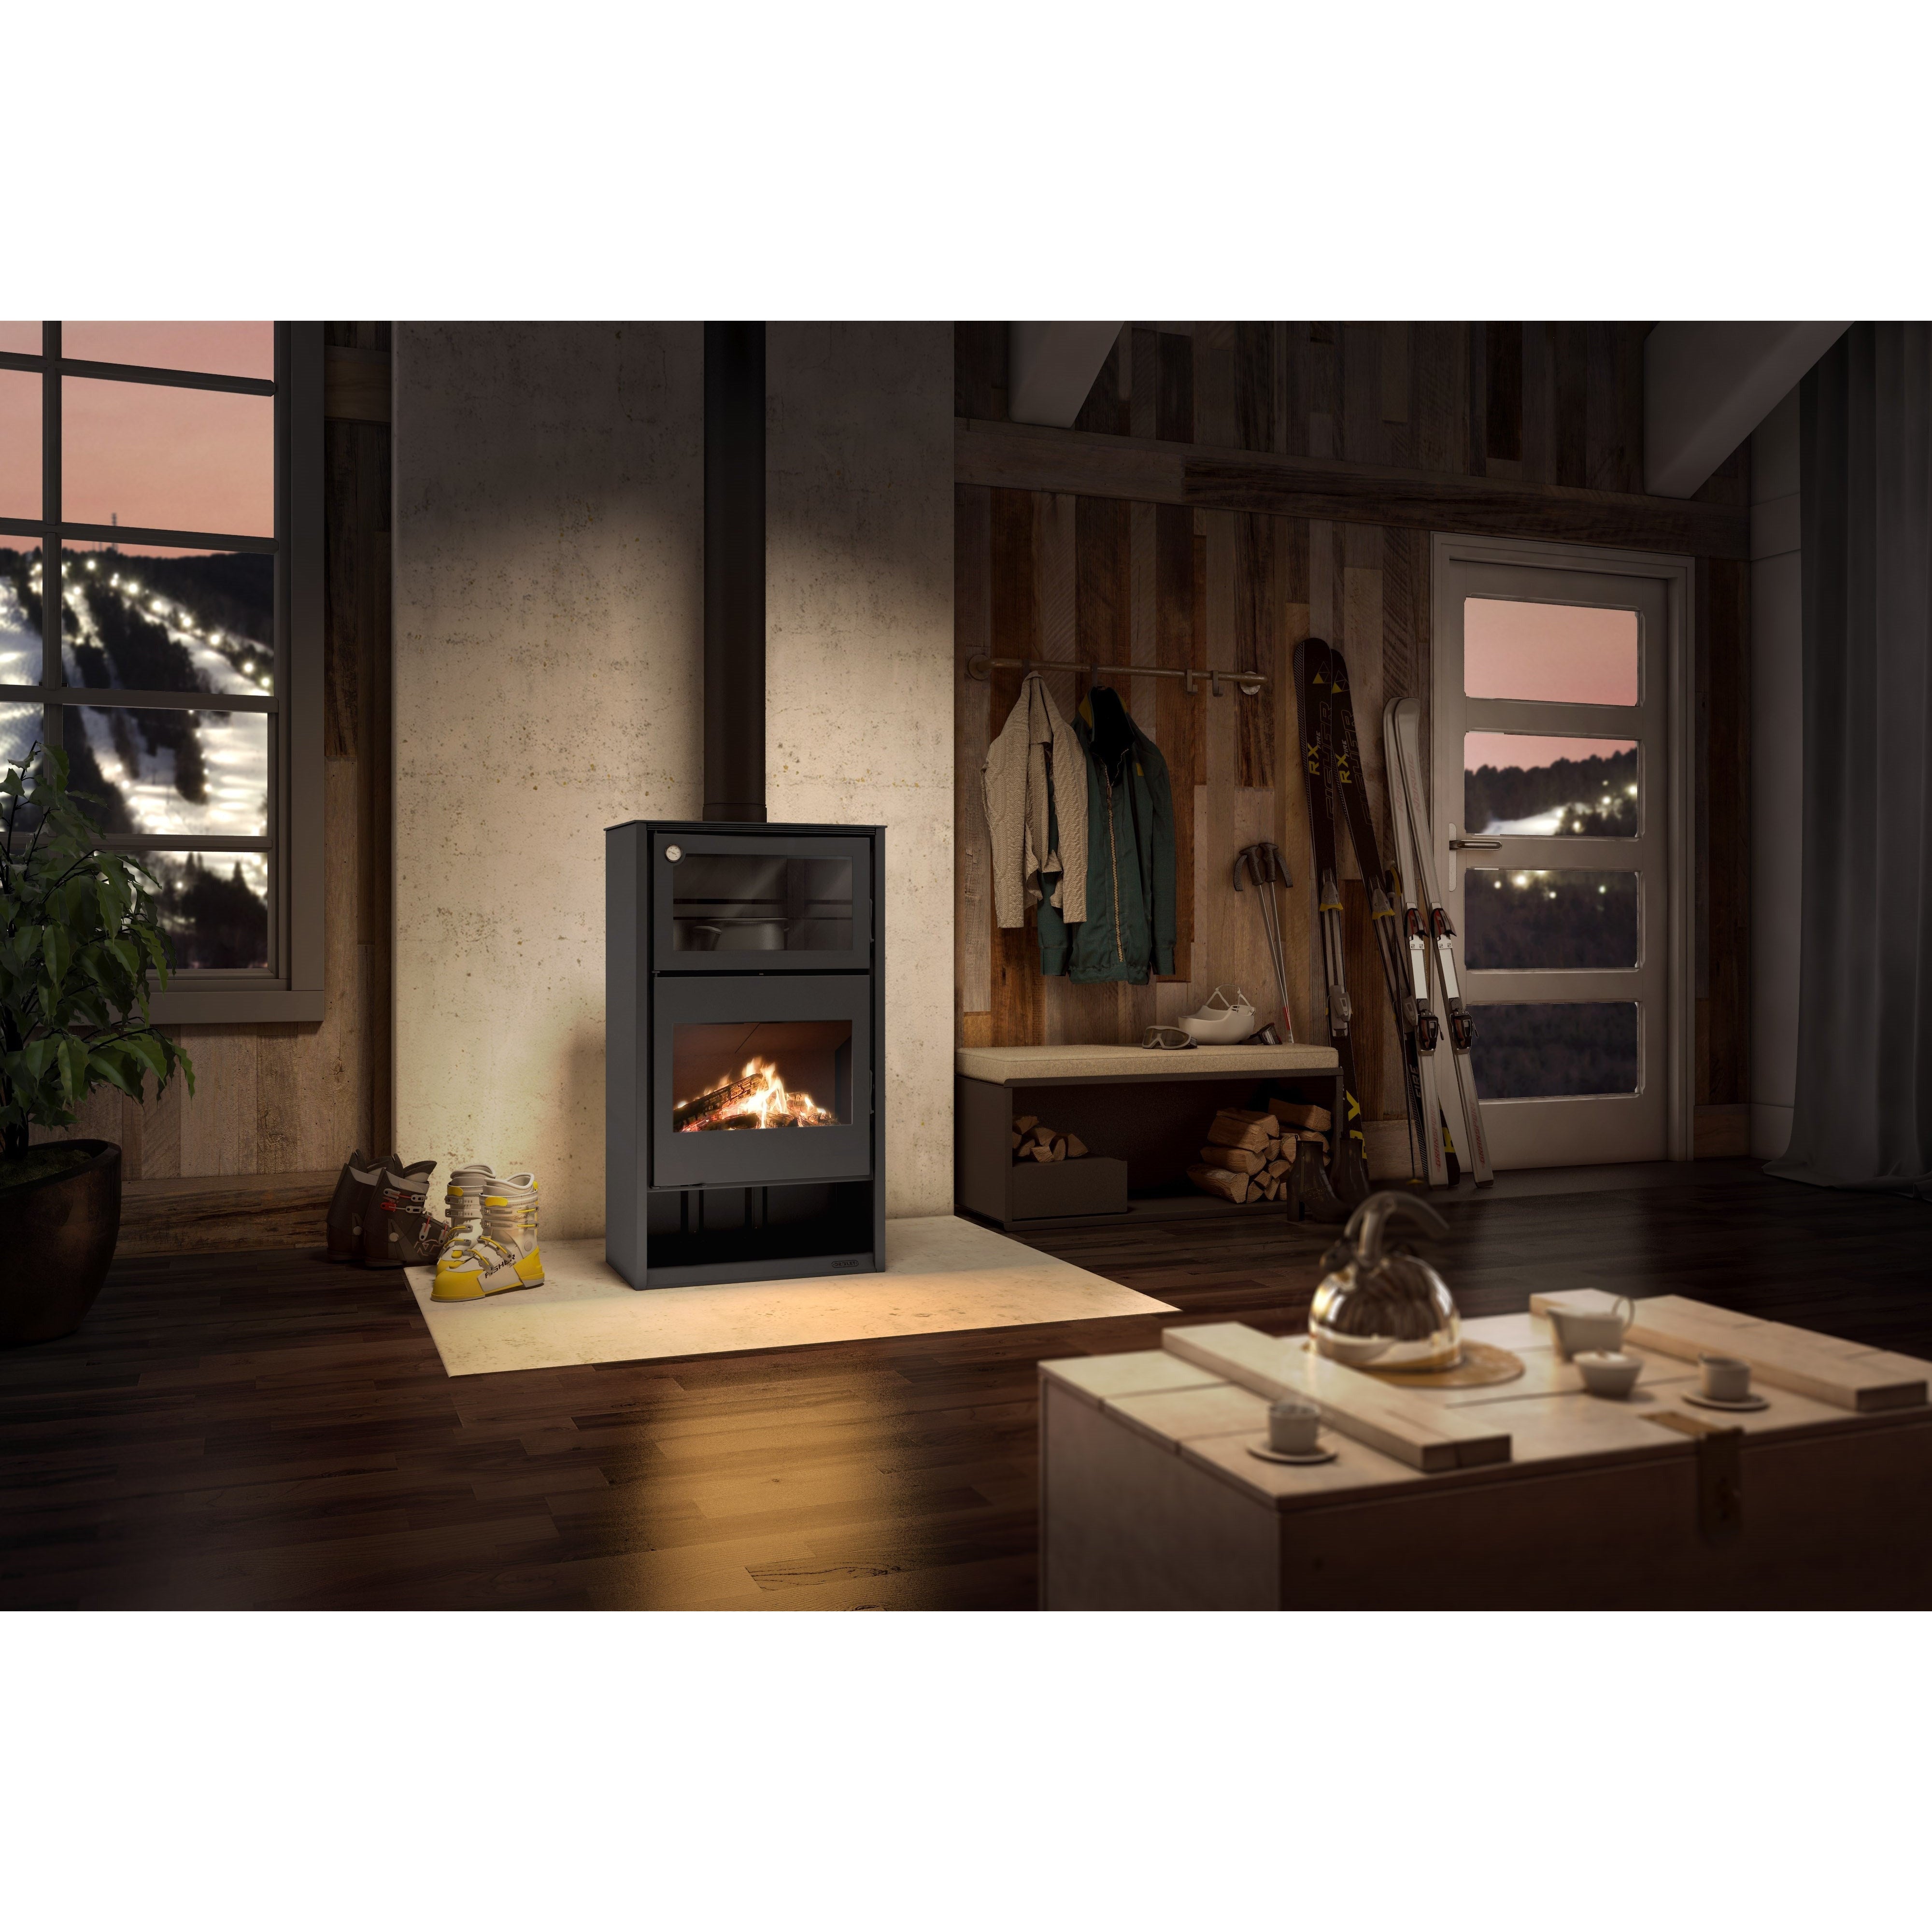 Drolet Atlas Wood Burning Cook Stove DB04810 - New Star Living